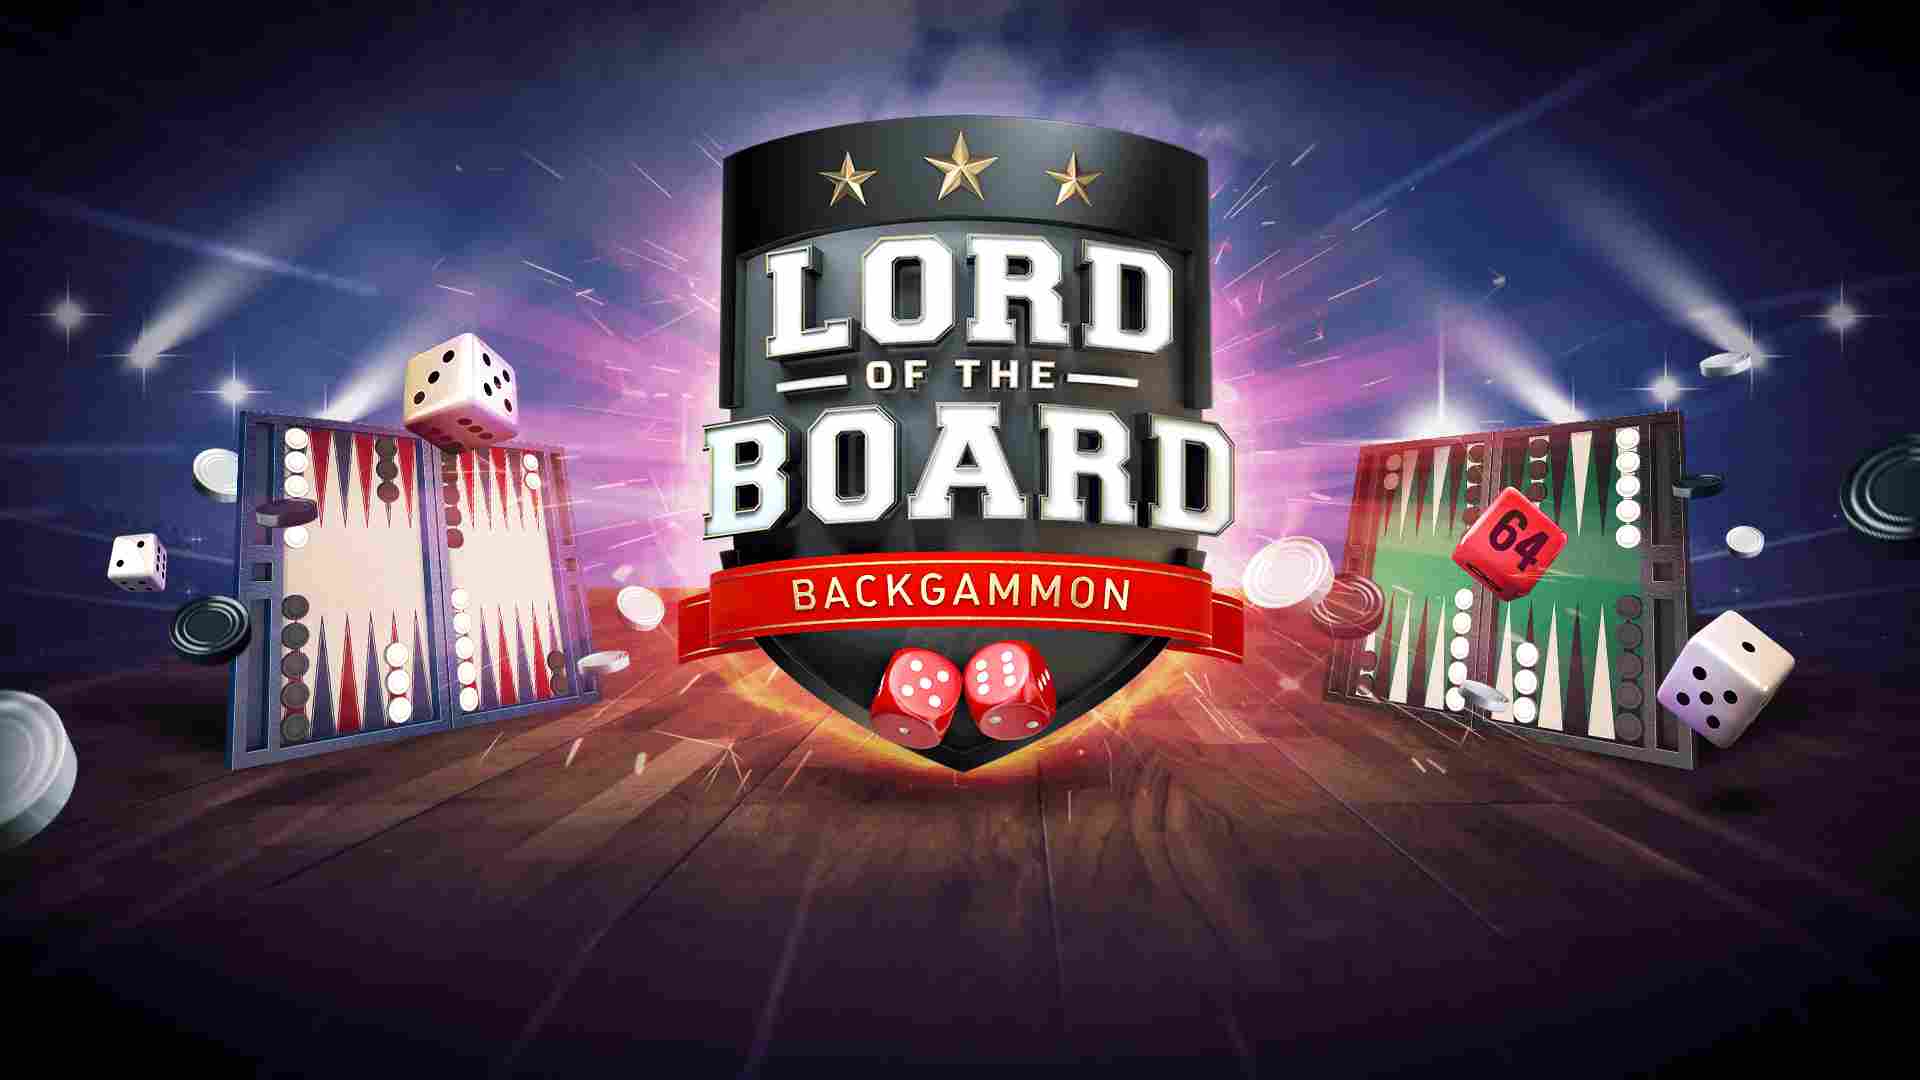 Download Backgammon - Lord of the Board Mod APK - (Unlimited money)